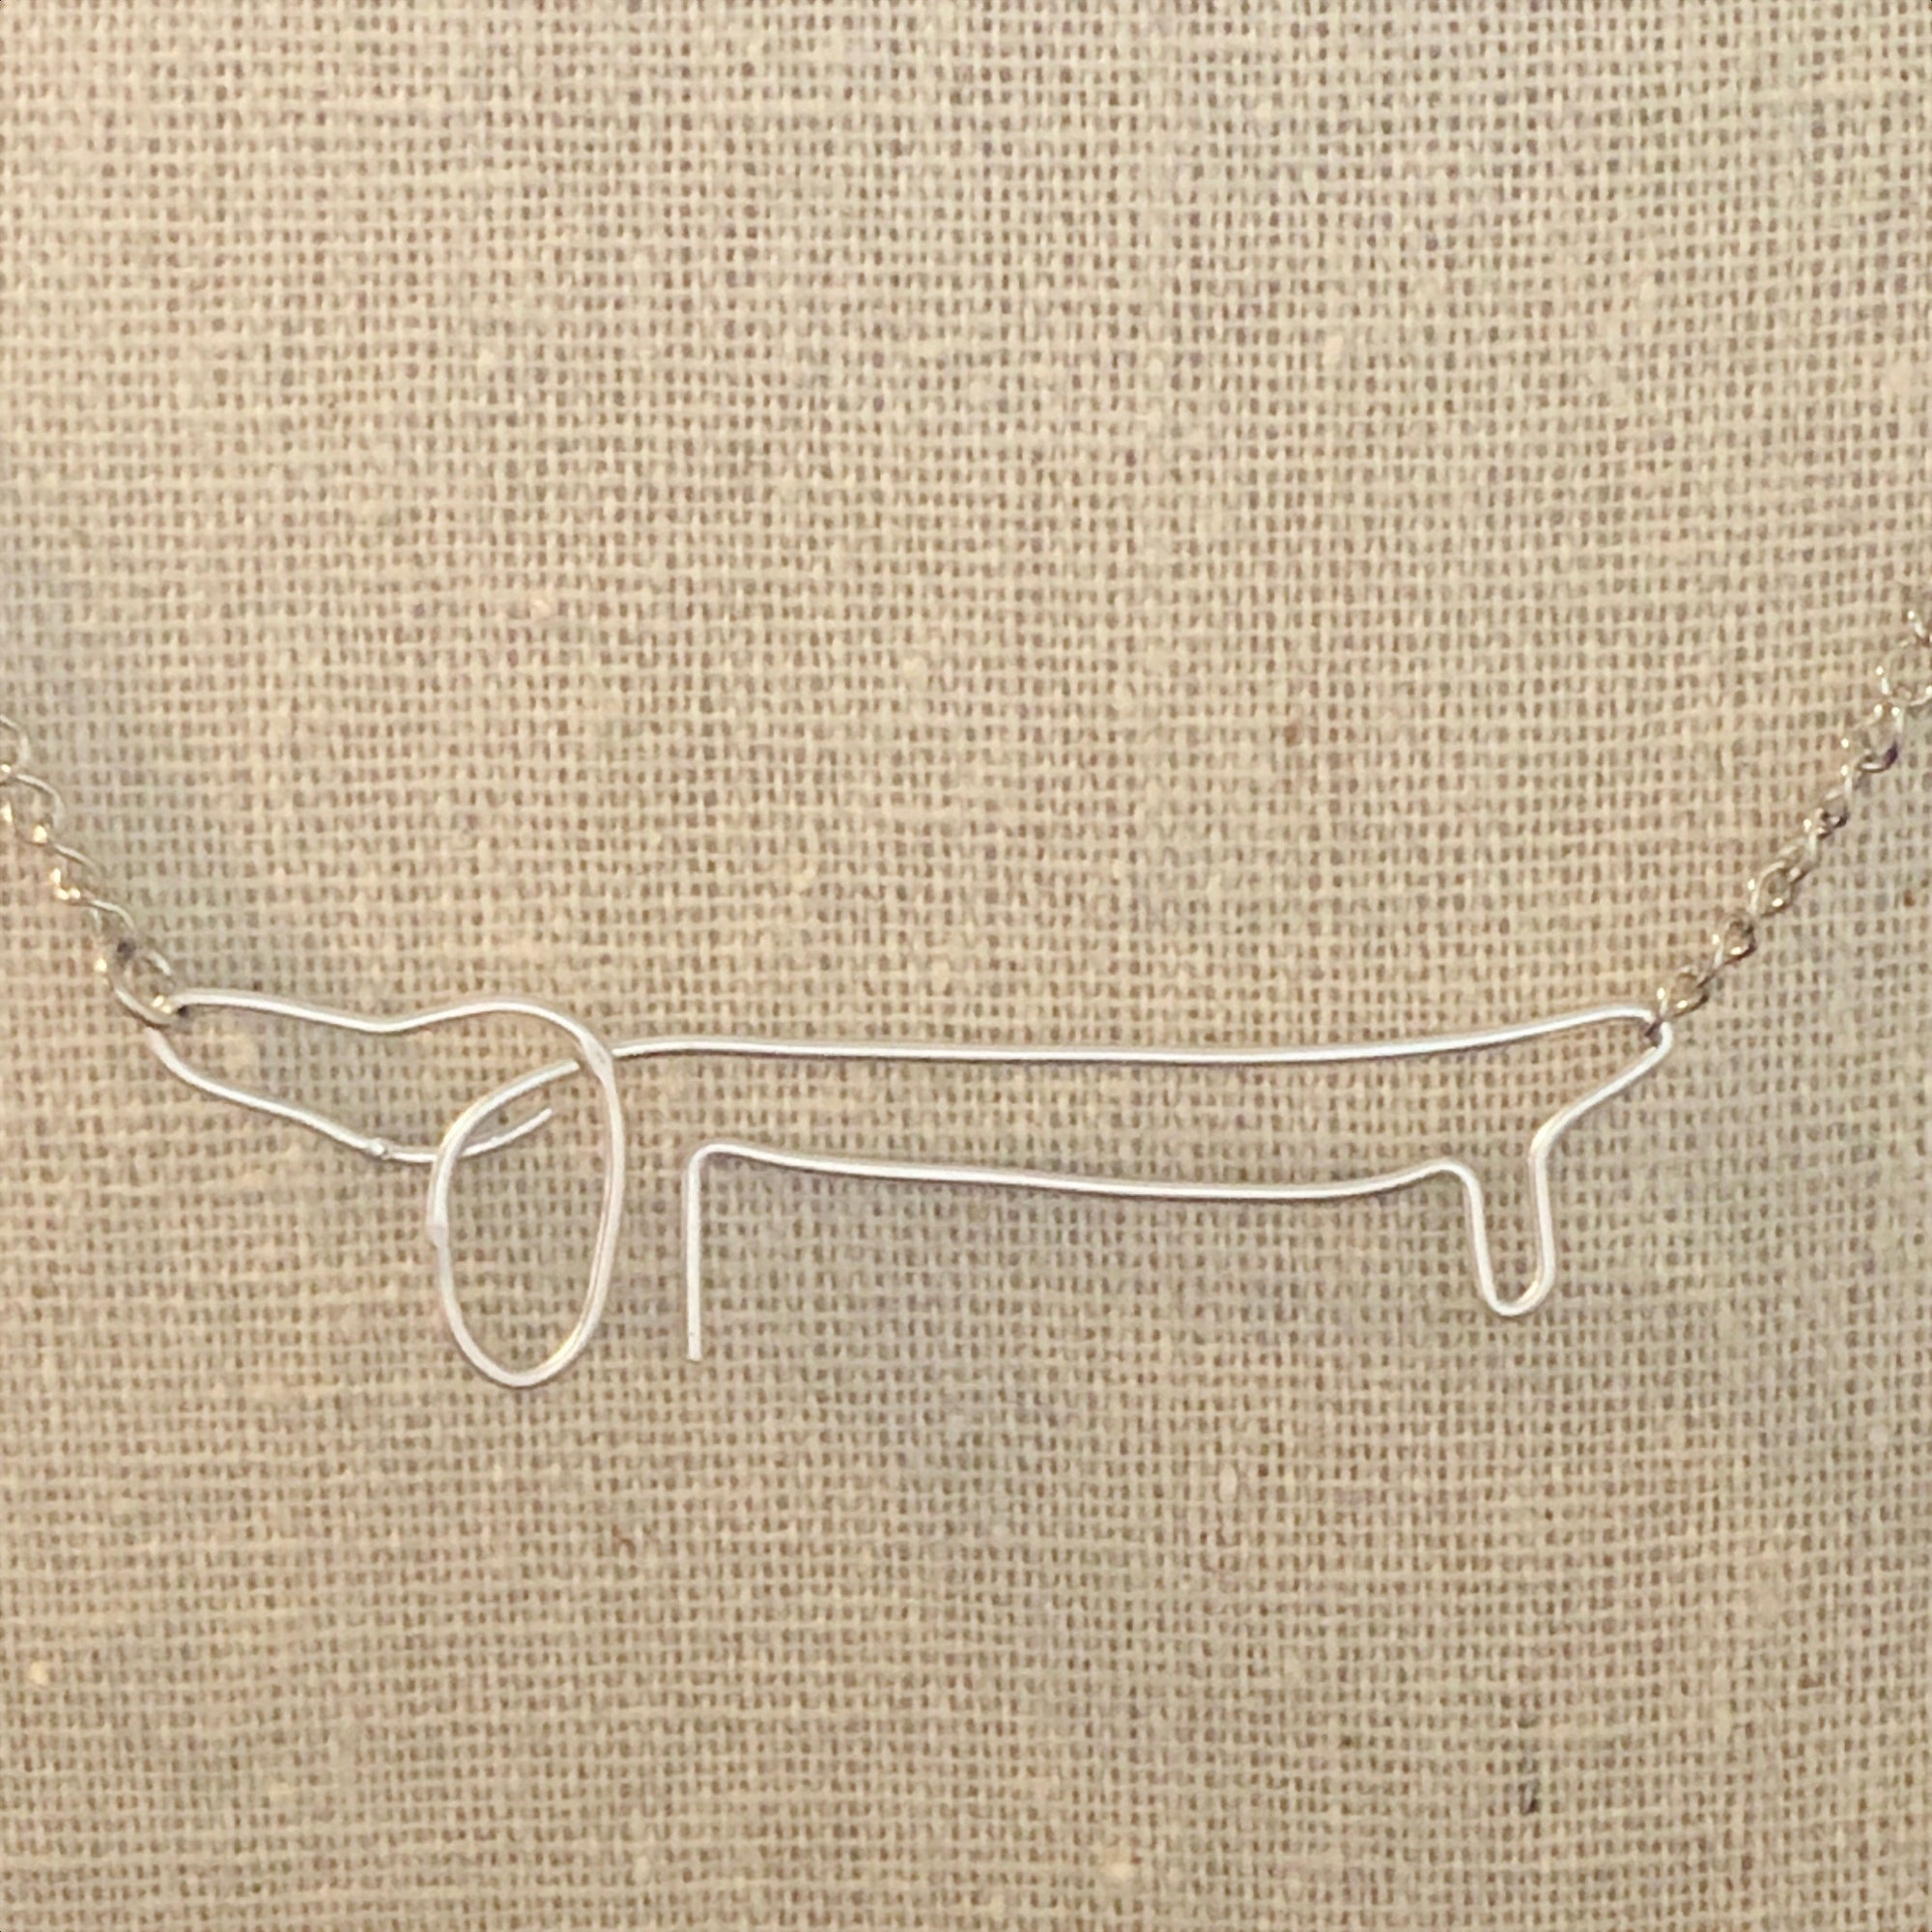 Sterling silver sausage dog dachshund gifts • Pablo Picasso doxie wearable art • Longhaired dachshund art • Picasso reproduction dachshund